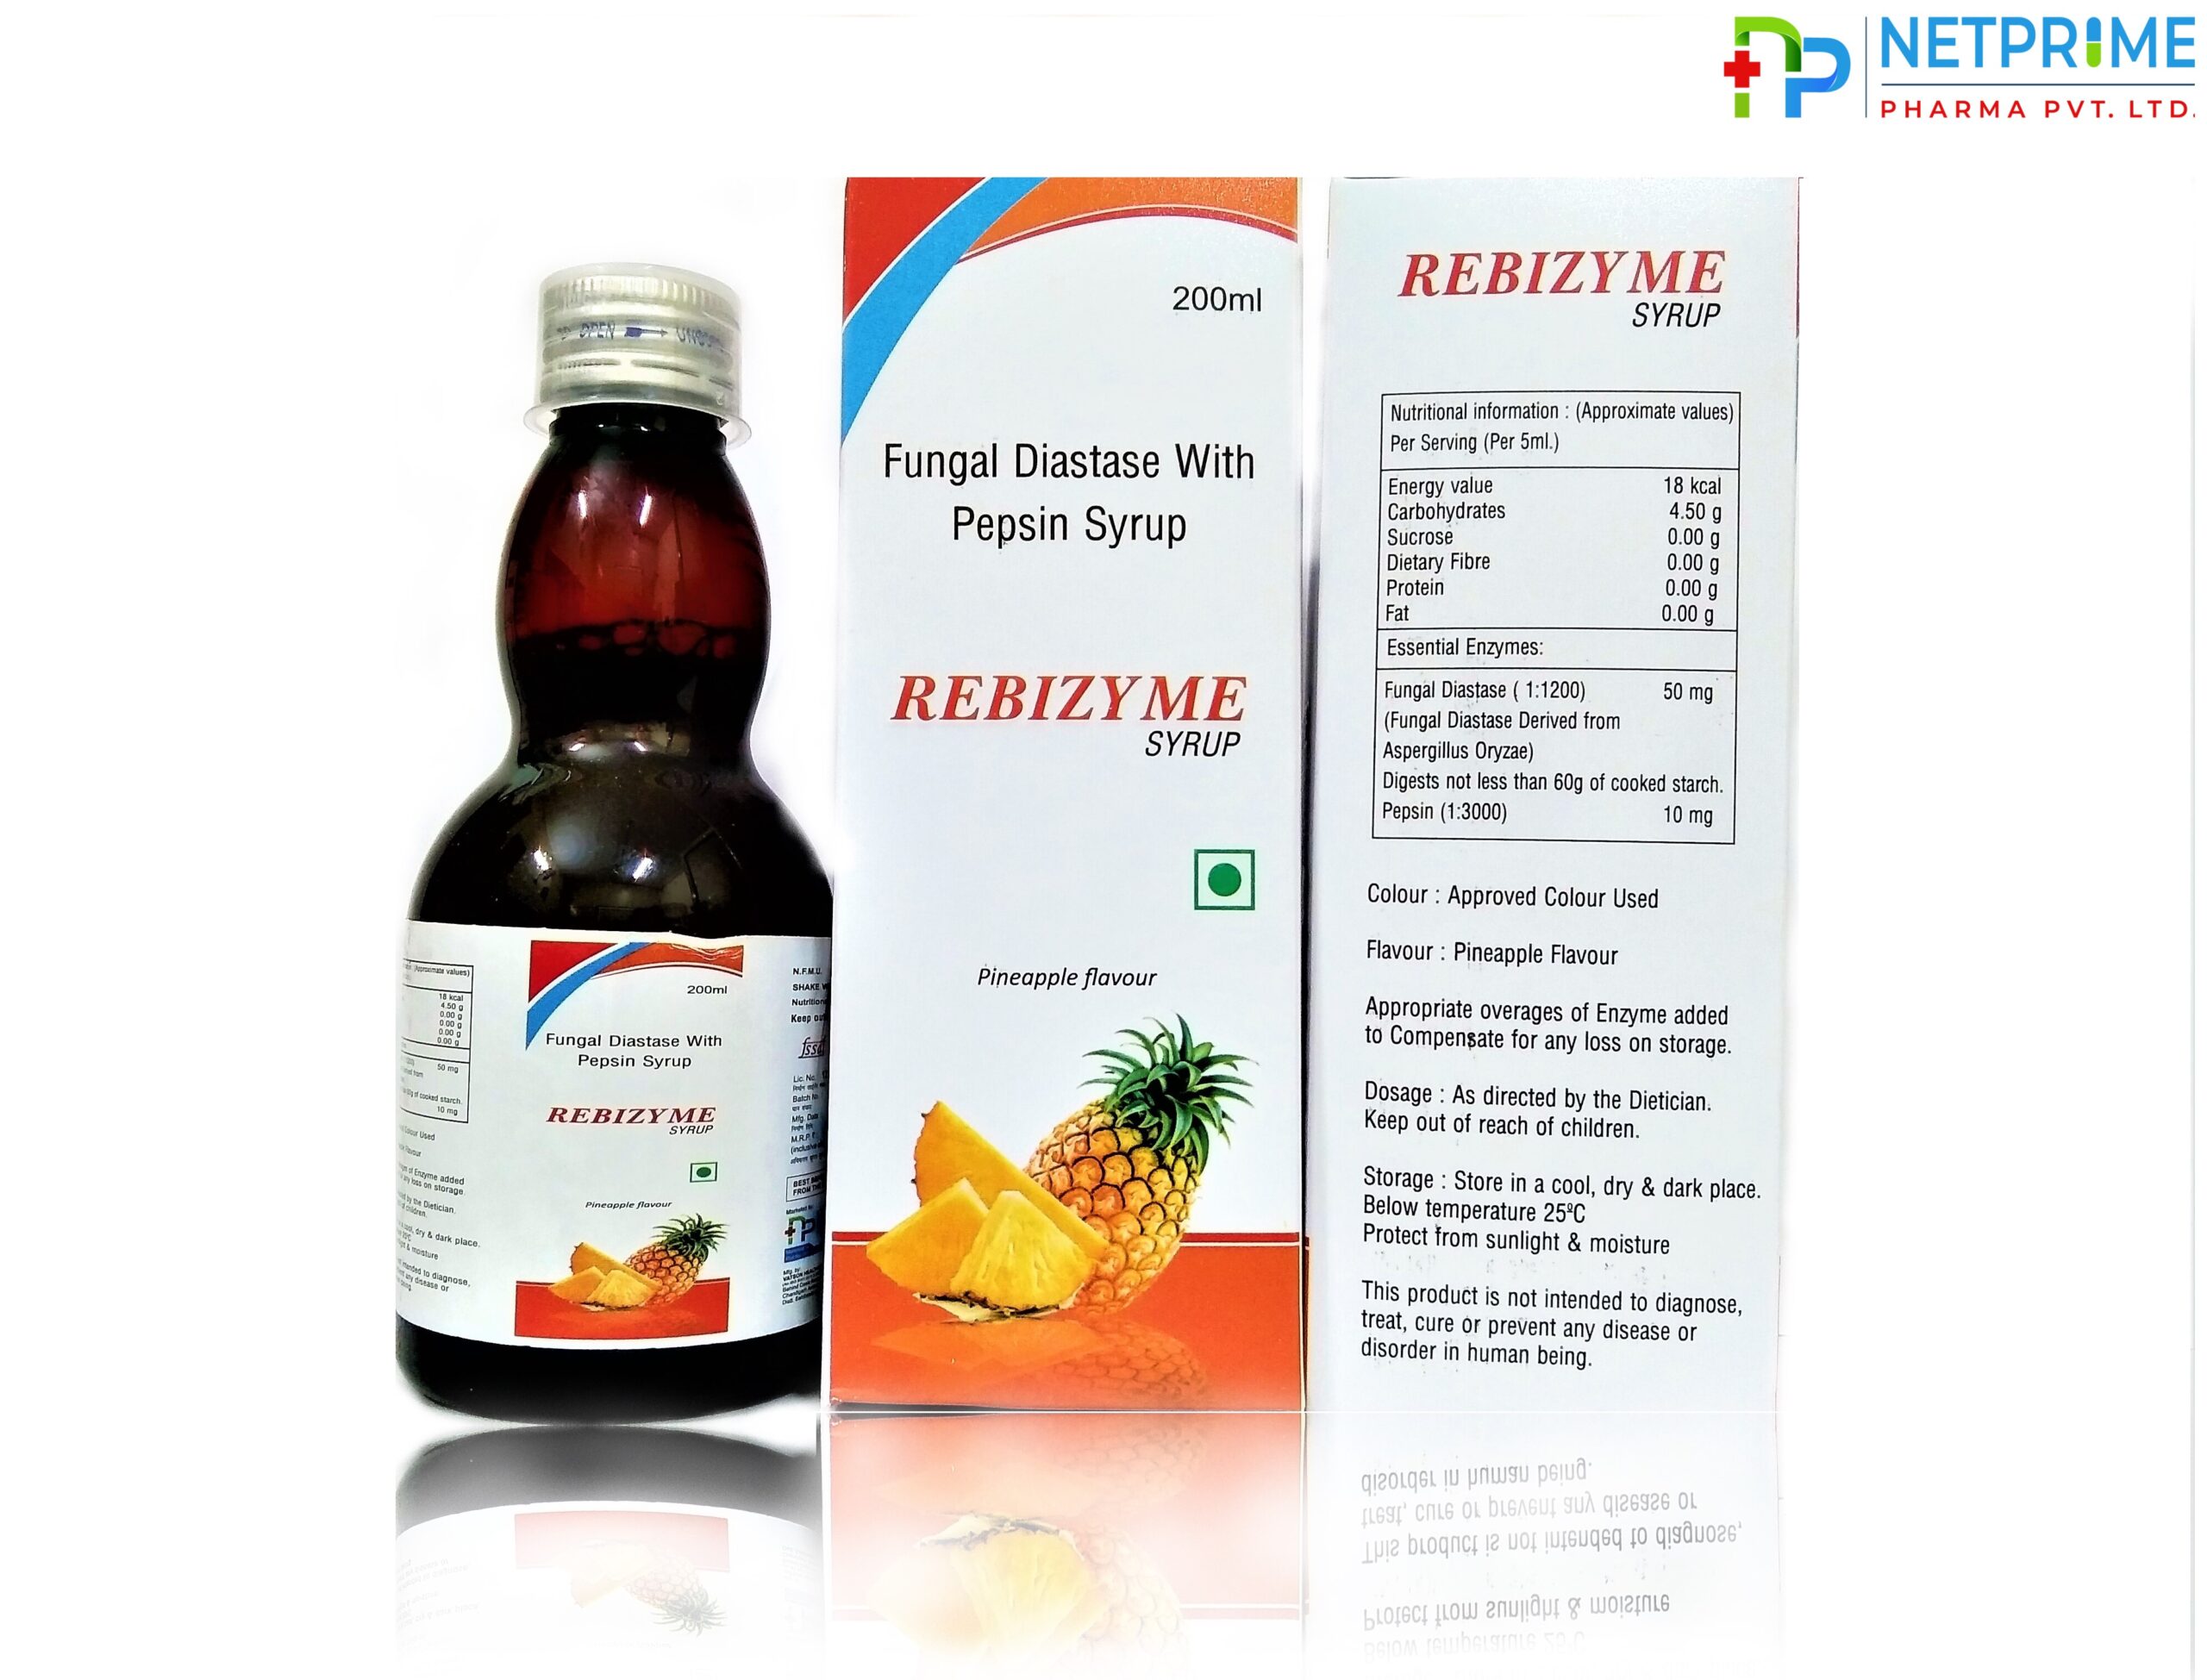 Fungal Diastase and Papsin Syrup